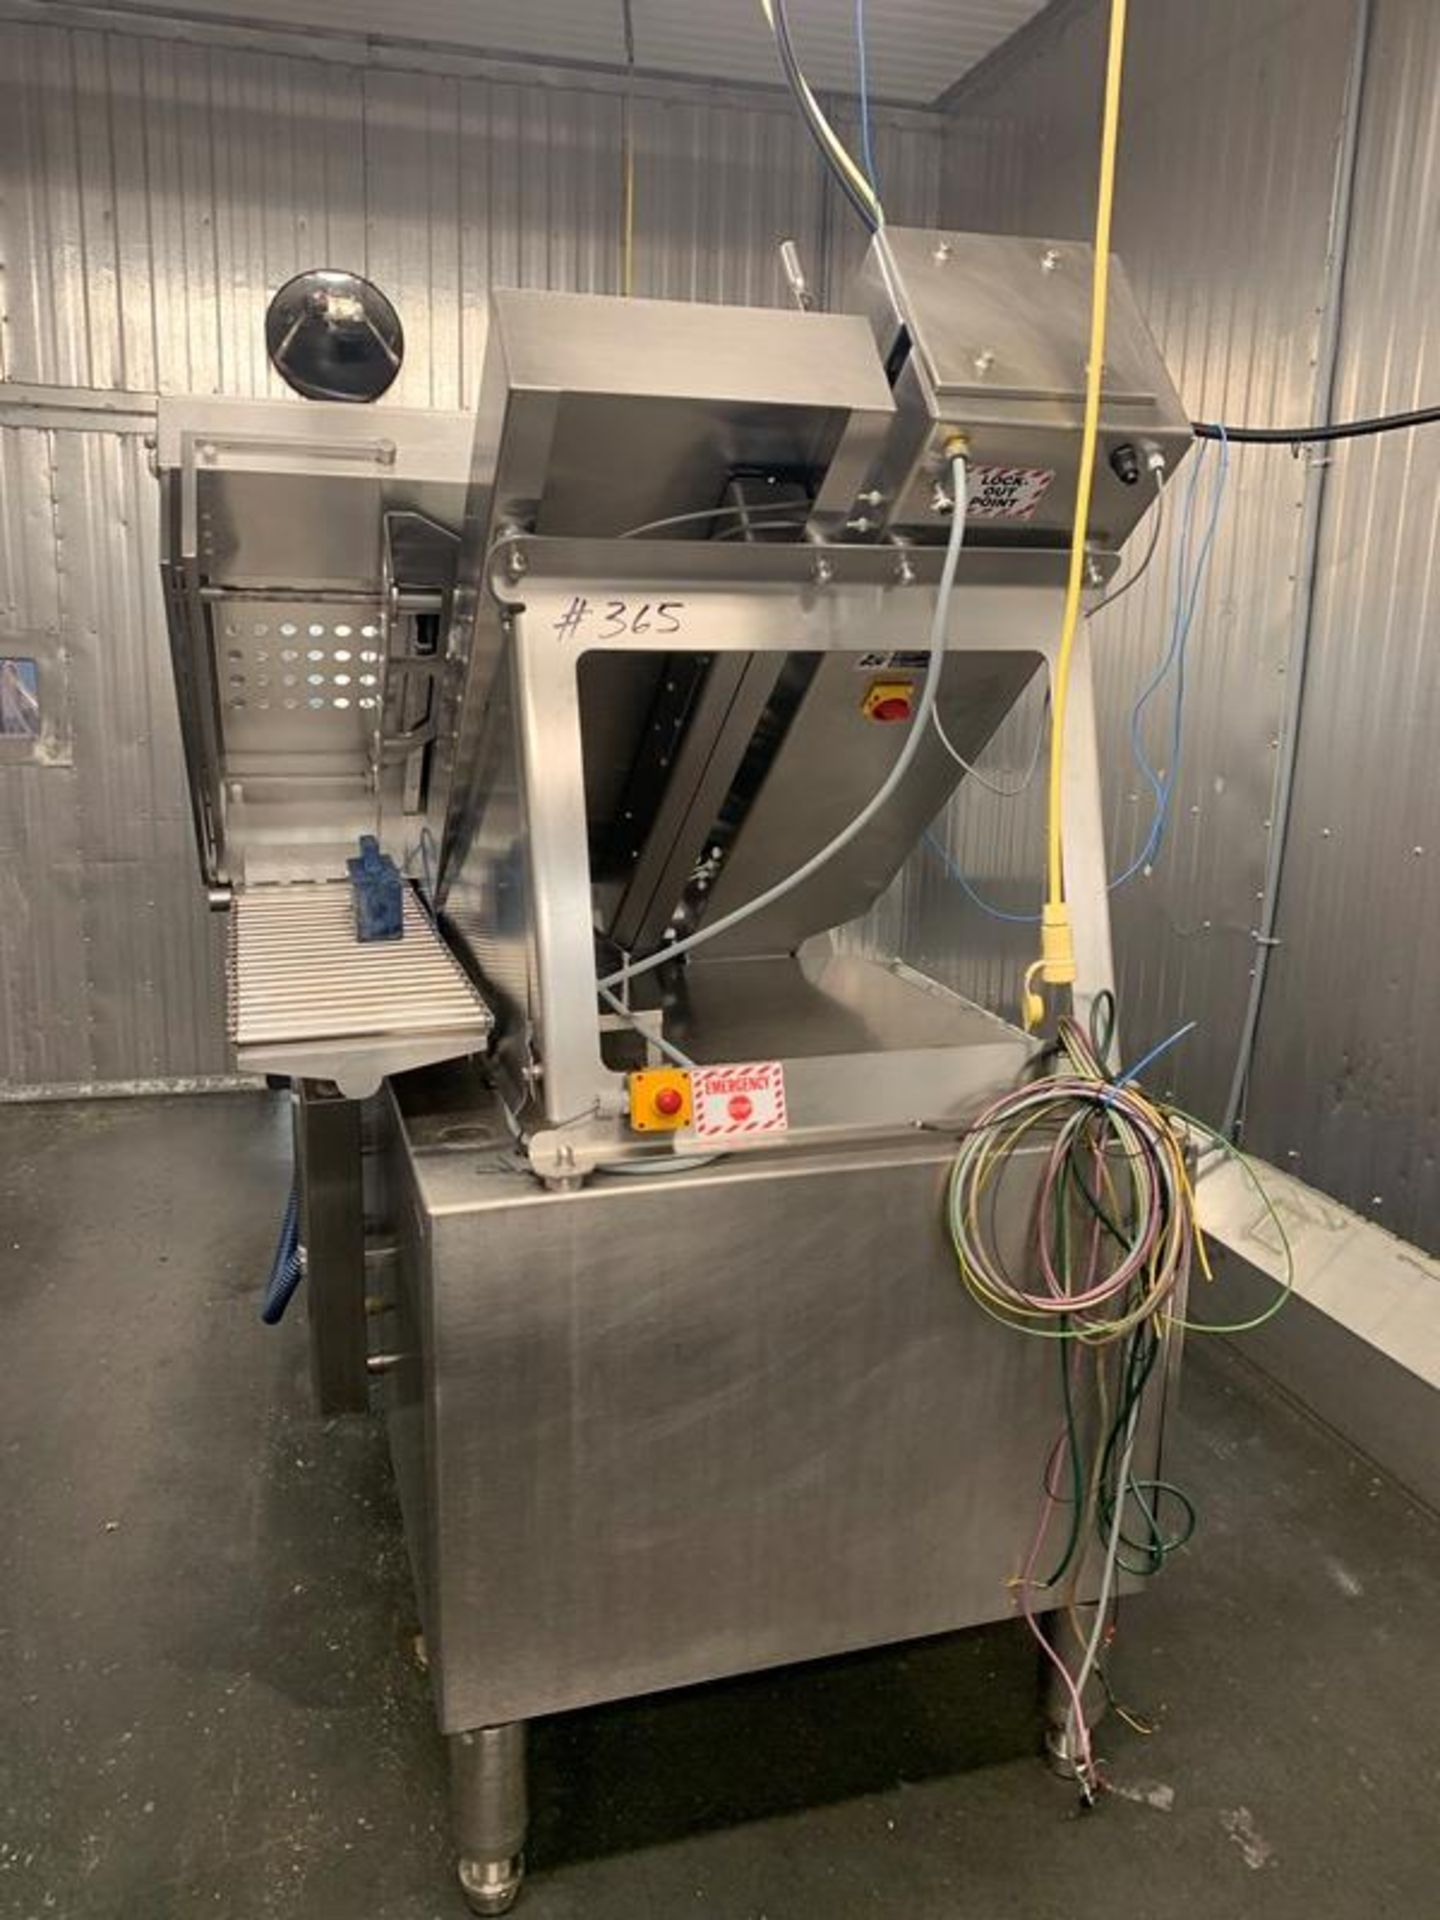 Weber Mdl. 602 Slicer, Ser. #389, with take-away conveyor, L15 (Located in Mt. Pleasant, IA)-ALL